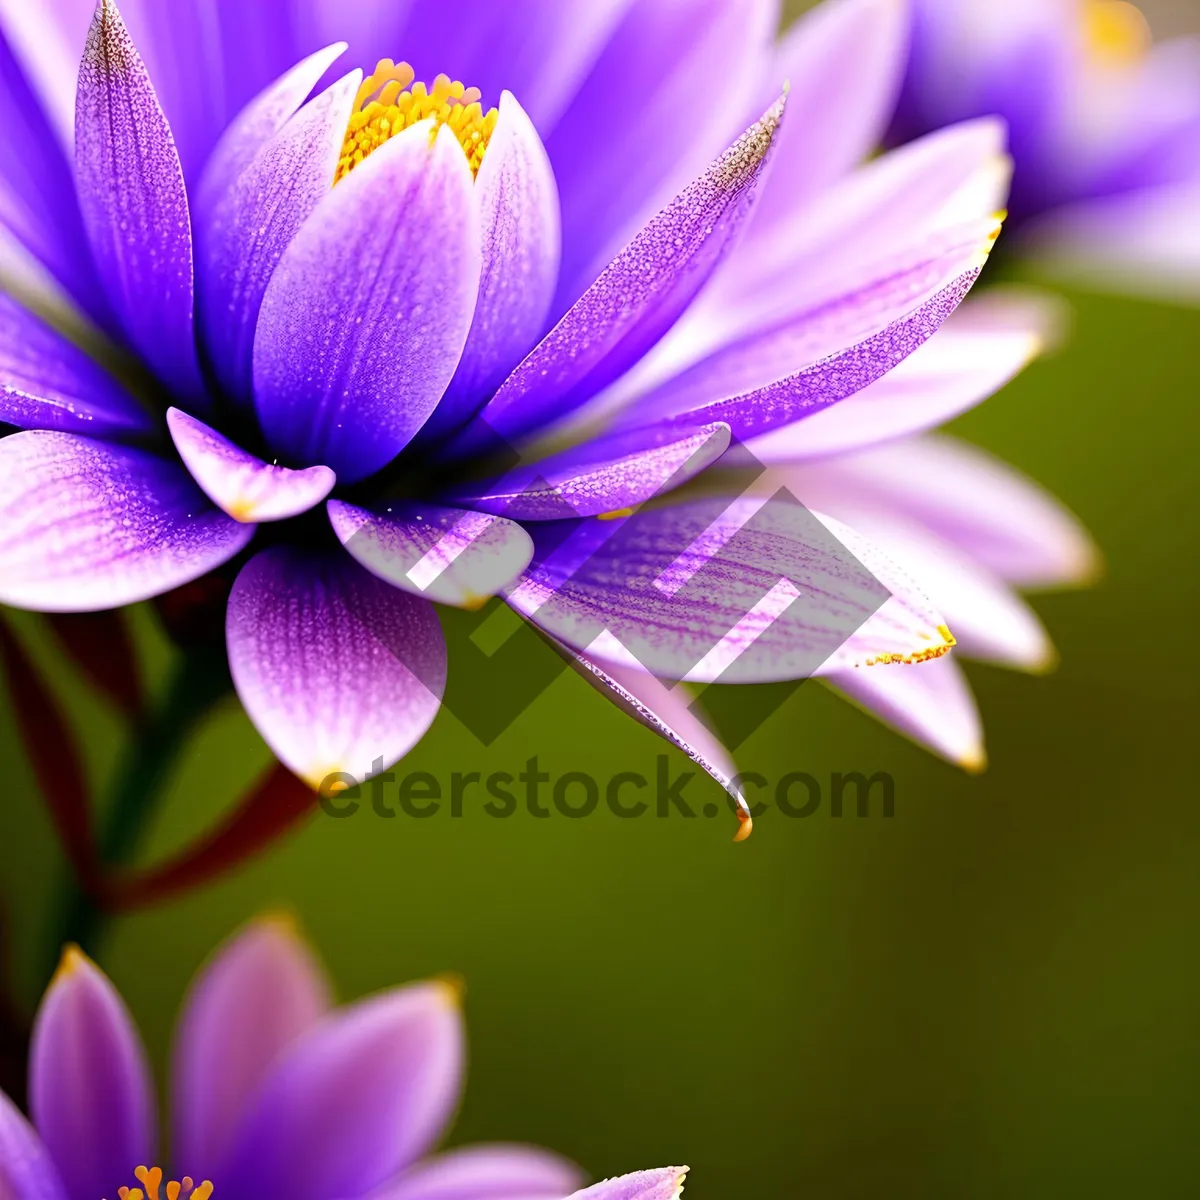 Picture of Purple Lotus Blossom in Full Bloom